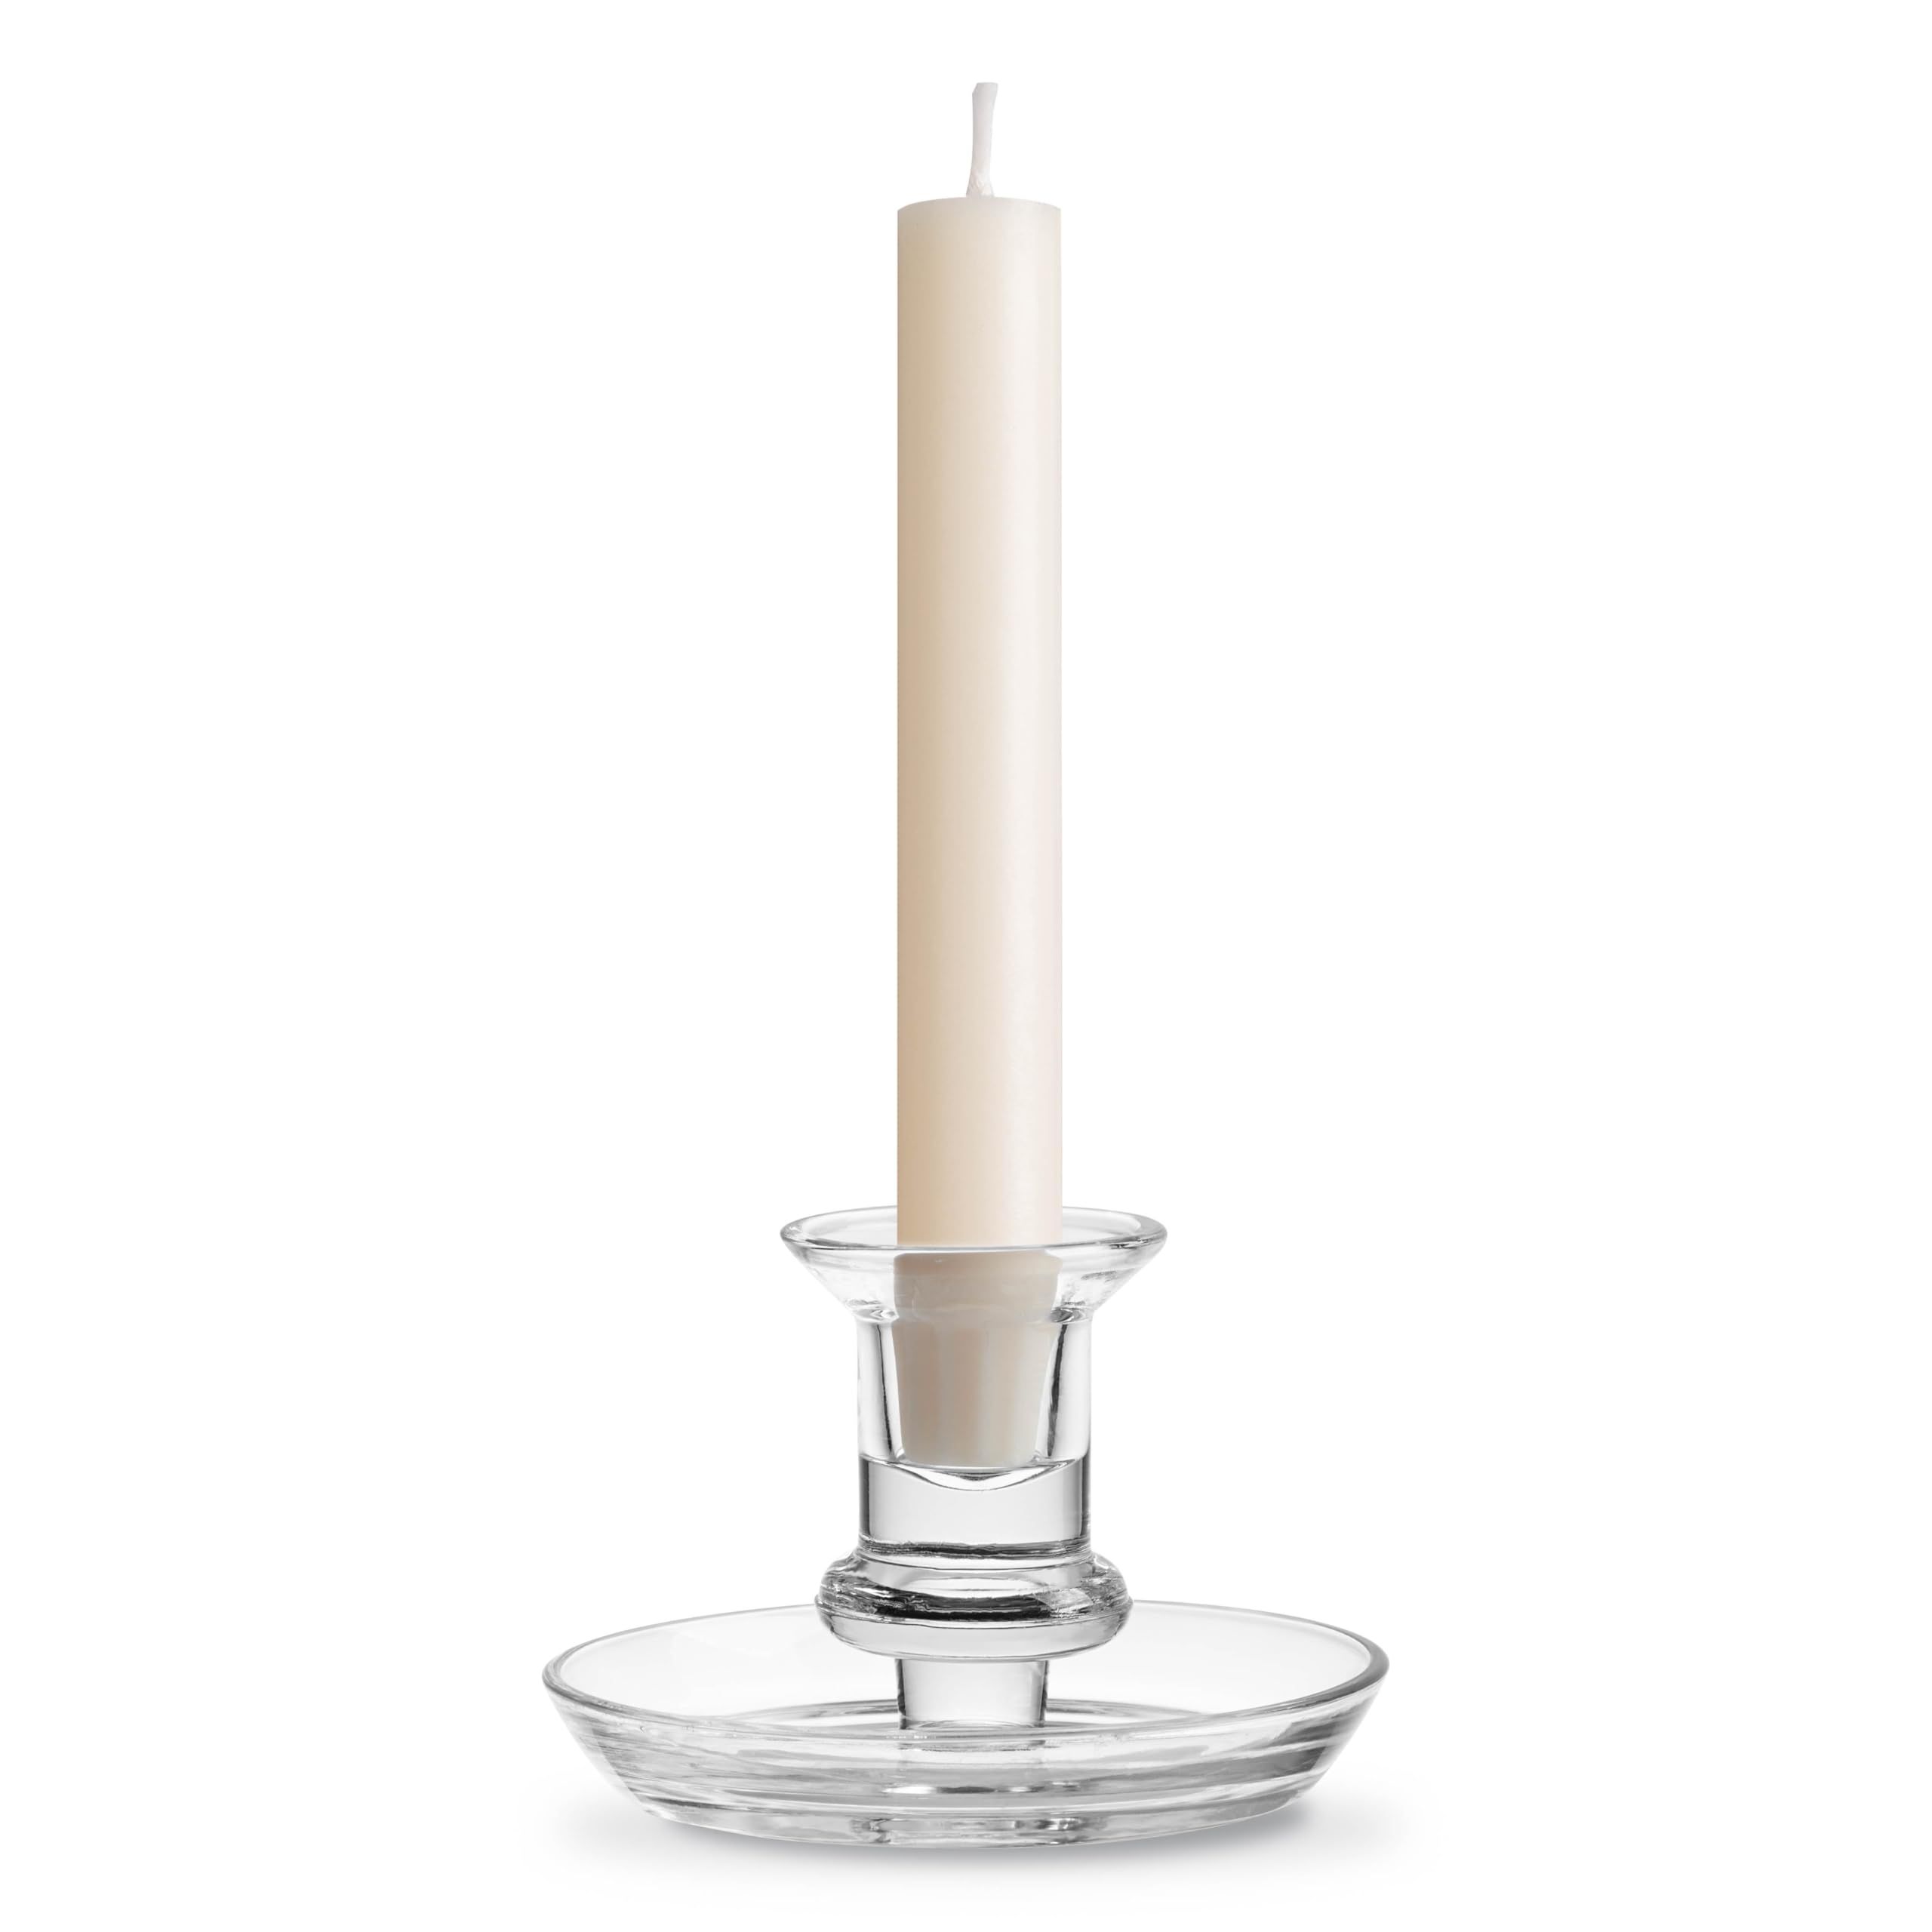 Torre & Tagus Delia Clear Glass Candle Holder for Candlestick with Drip Tray, 3 Inch Tall Taper Candle Holder for Standard Candle Sticks, Vintage Home Decor Dinner Tablescape Wedding Centerpiece | Amazon (US)